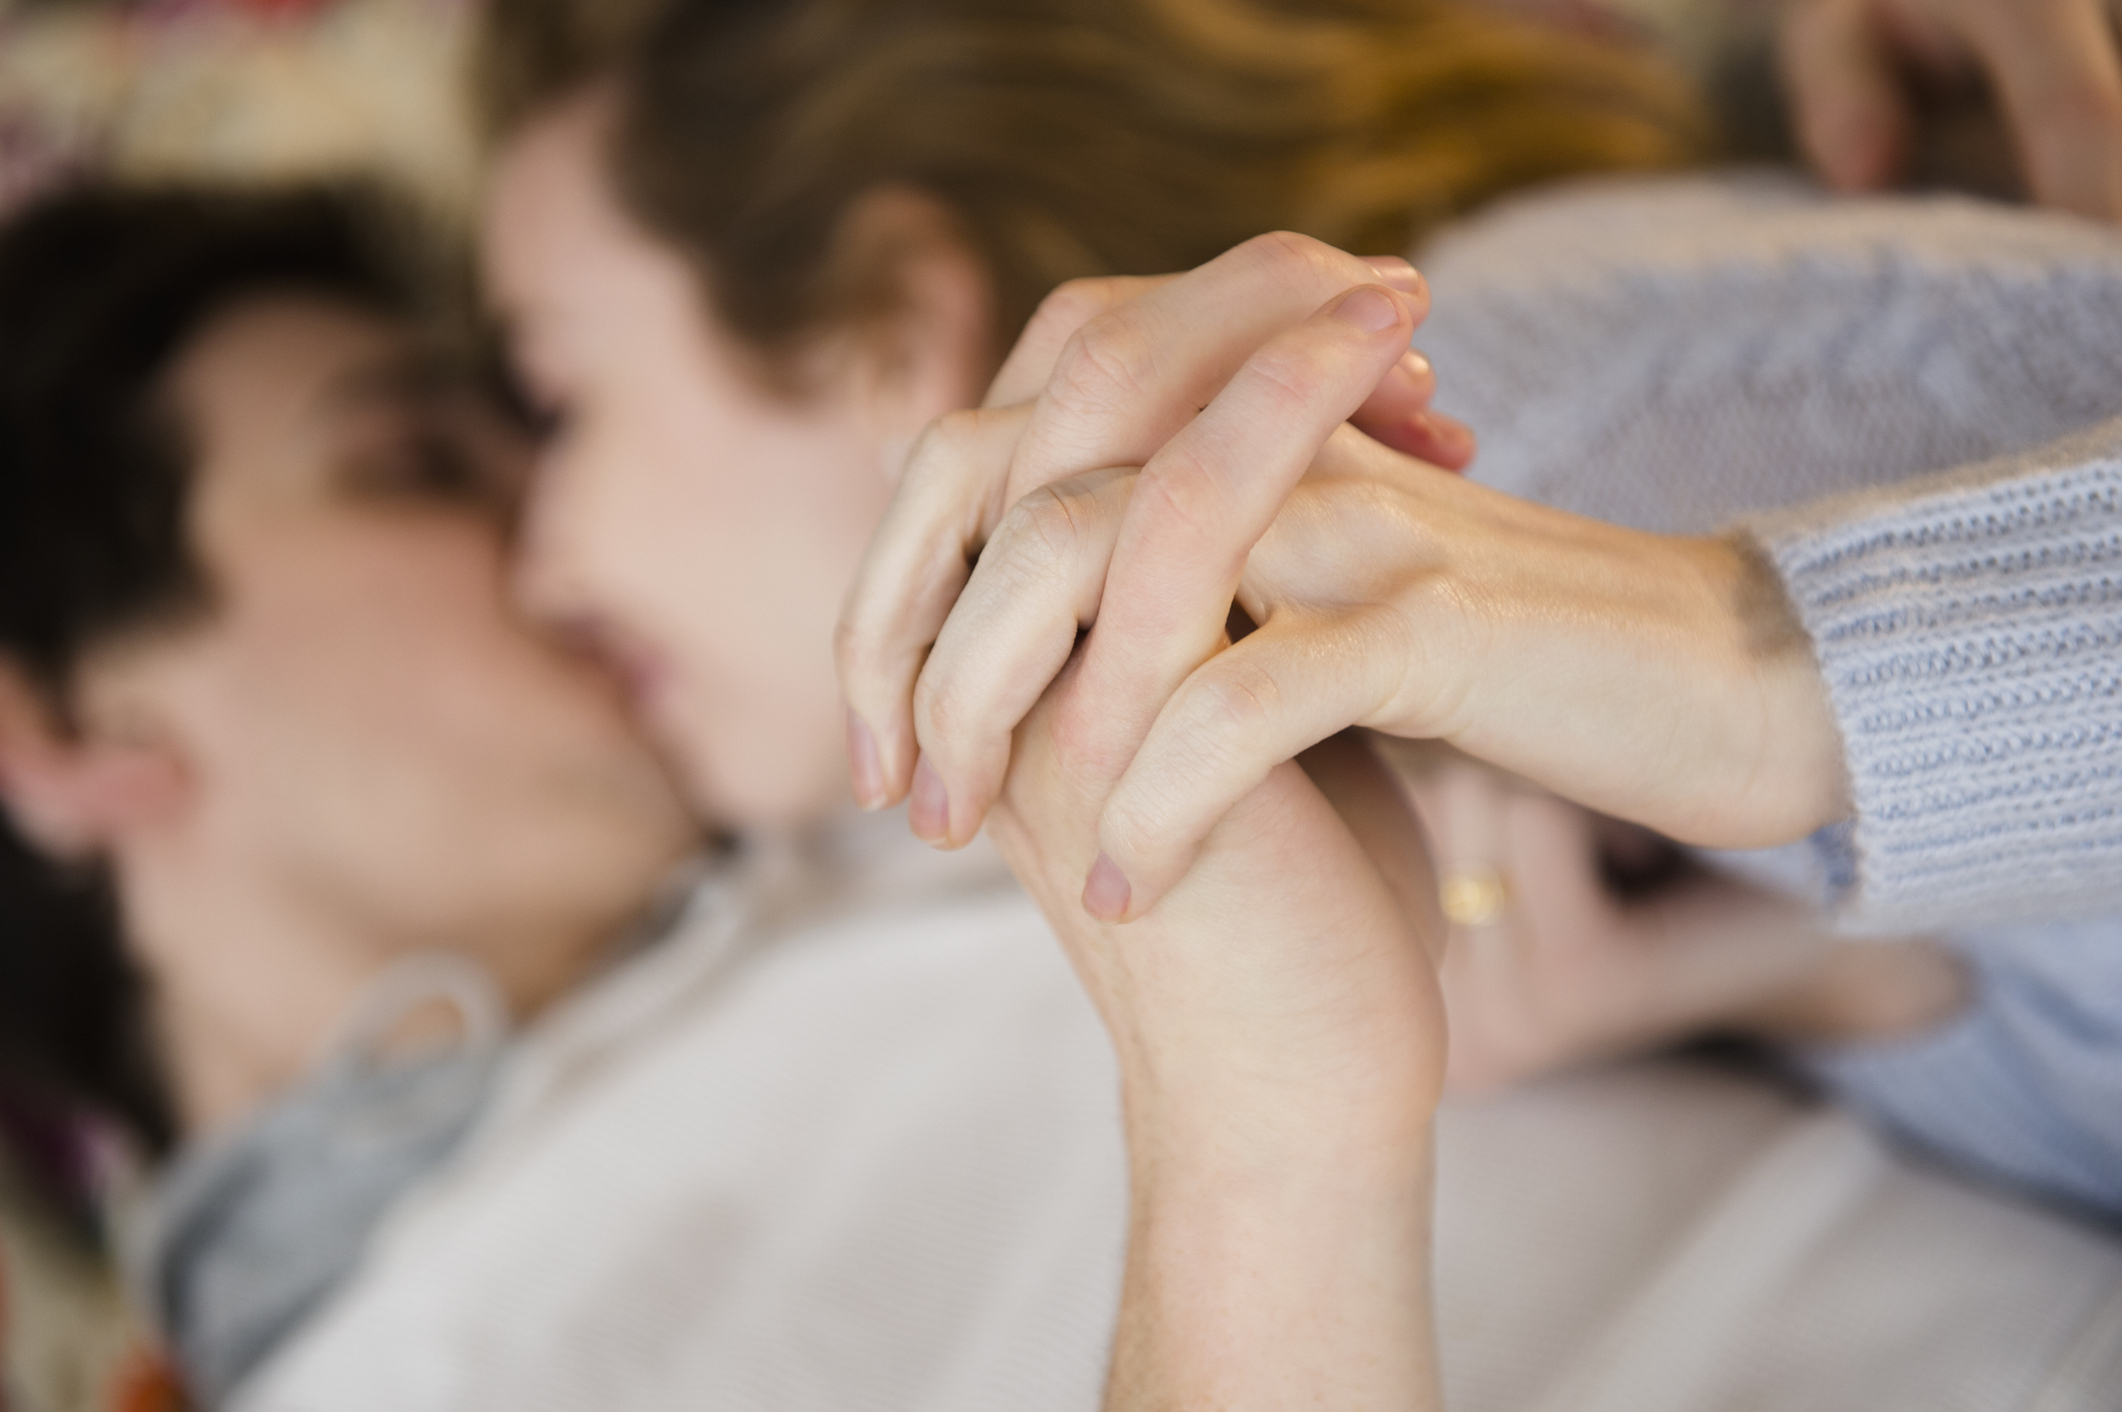 Two people in a close embrace, sharing a kiss, focus on interlocked hands